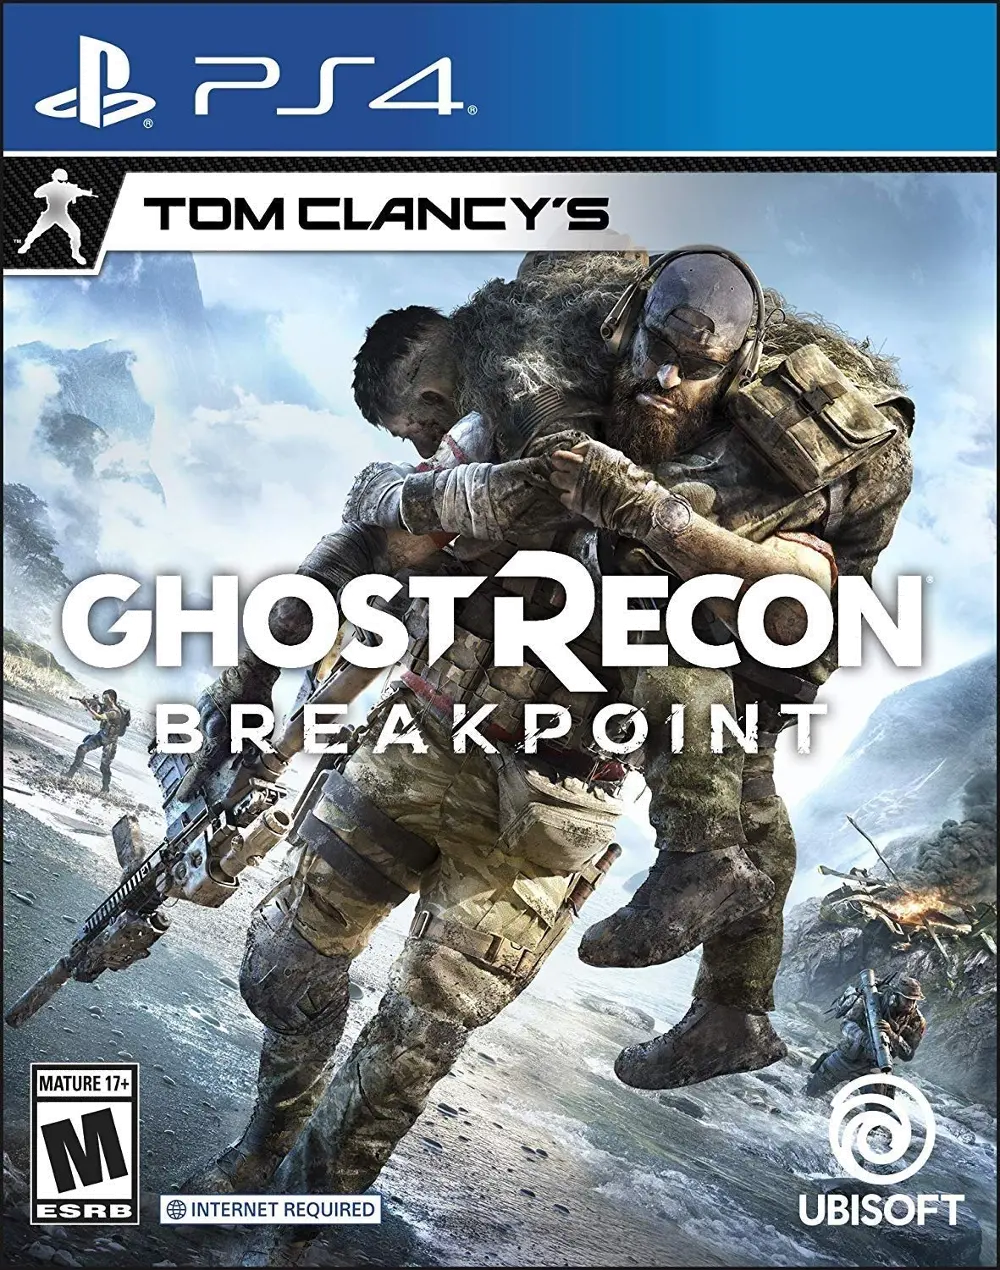 PS4/TOM_CLANCY_BRKPT Tom Clancy's Ghost Recon Breakpoint - PS4-1